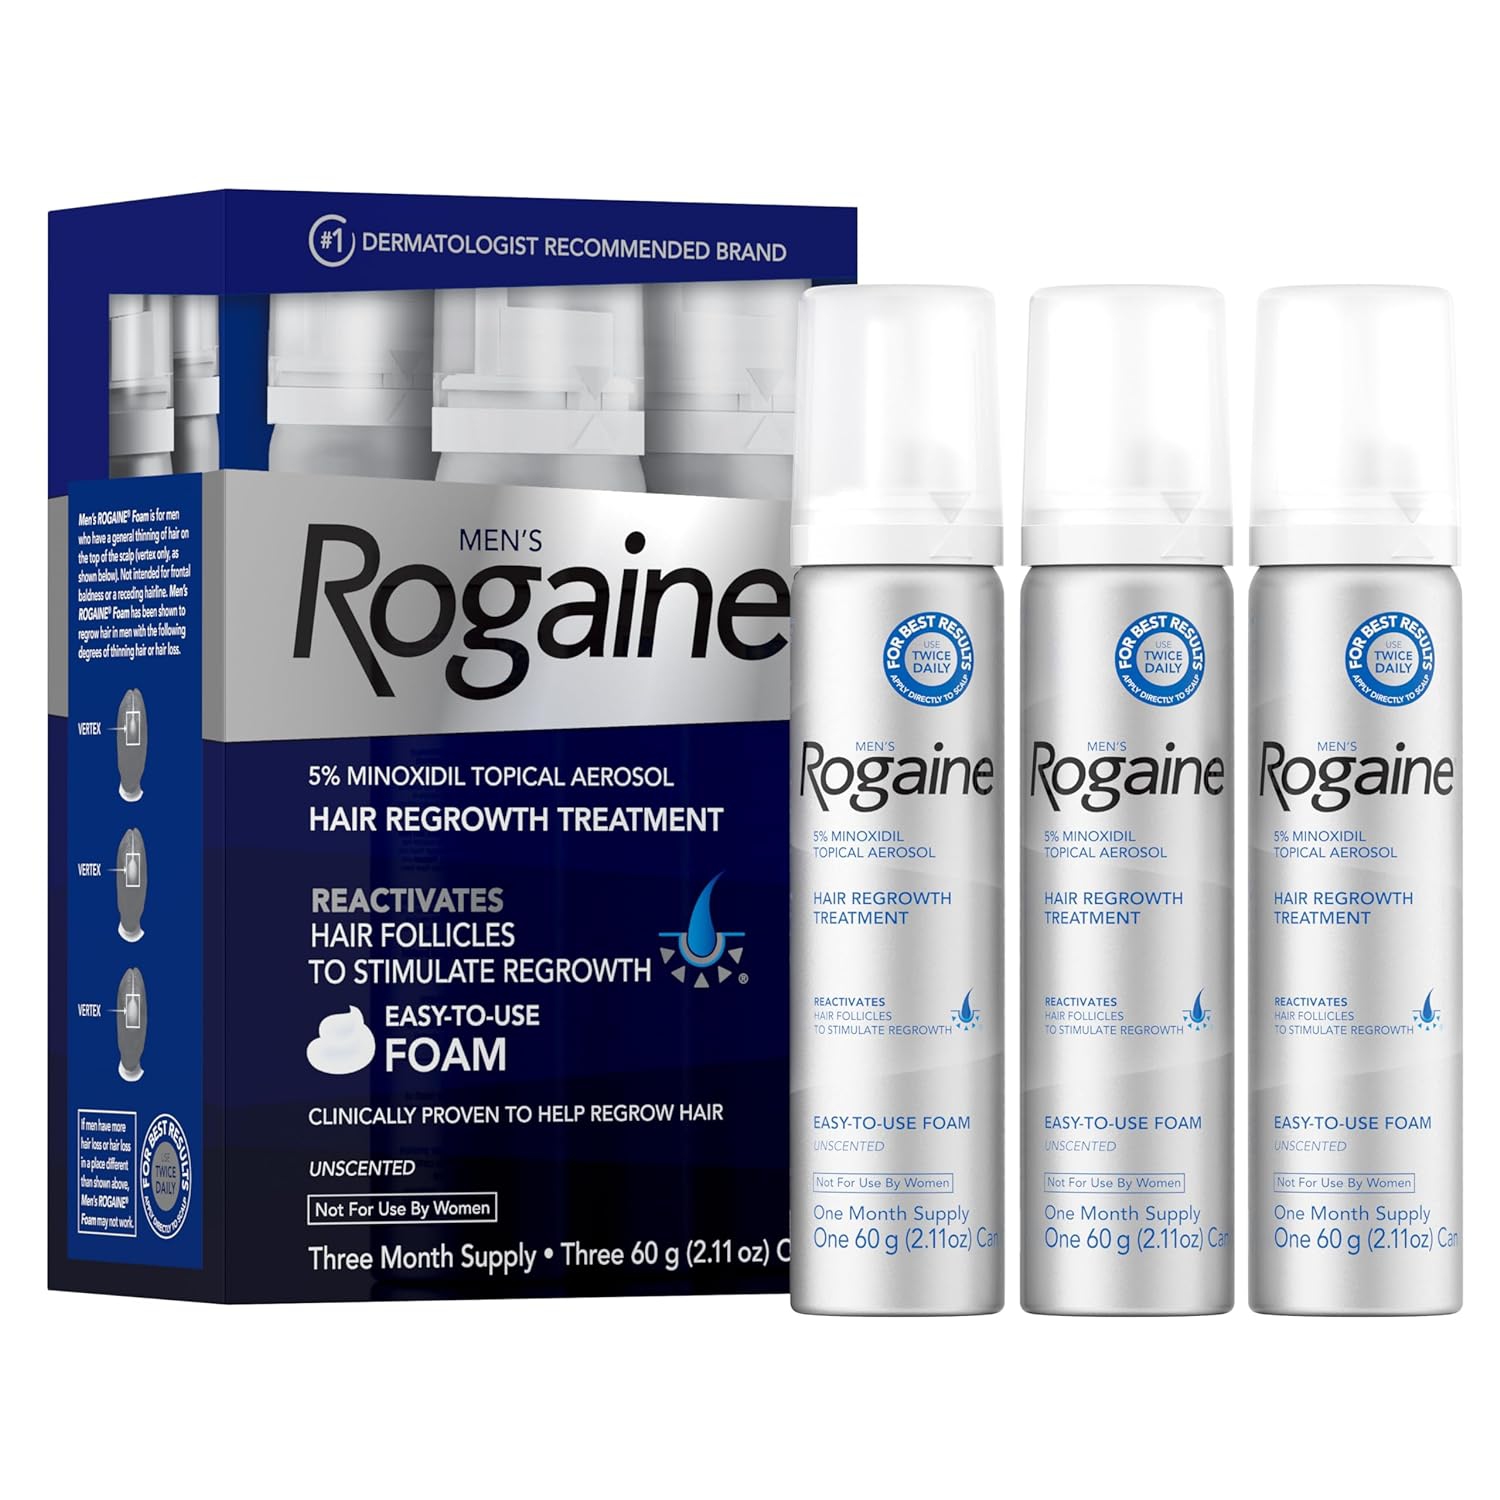 Men's Rogaine 5% Minoxidil Foam for Hair Regrowth, Topical Treatment, 2.11 oz (Pack of 3)